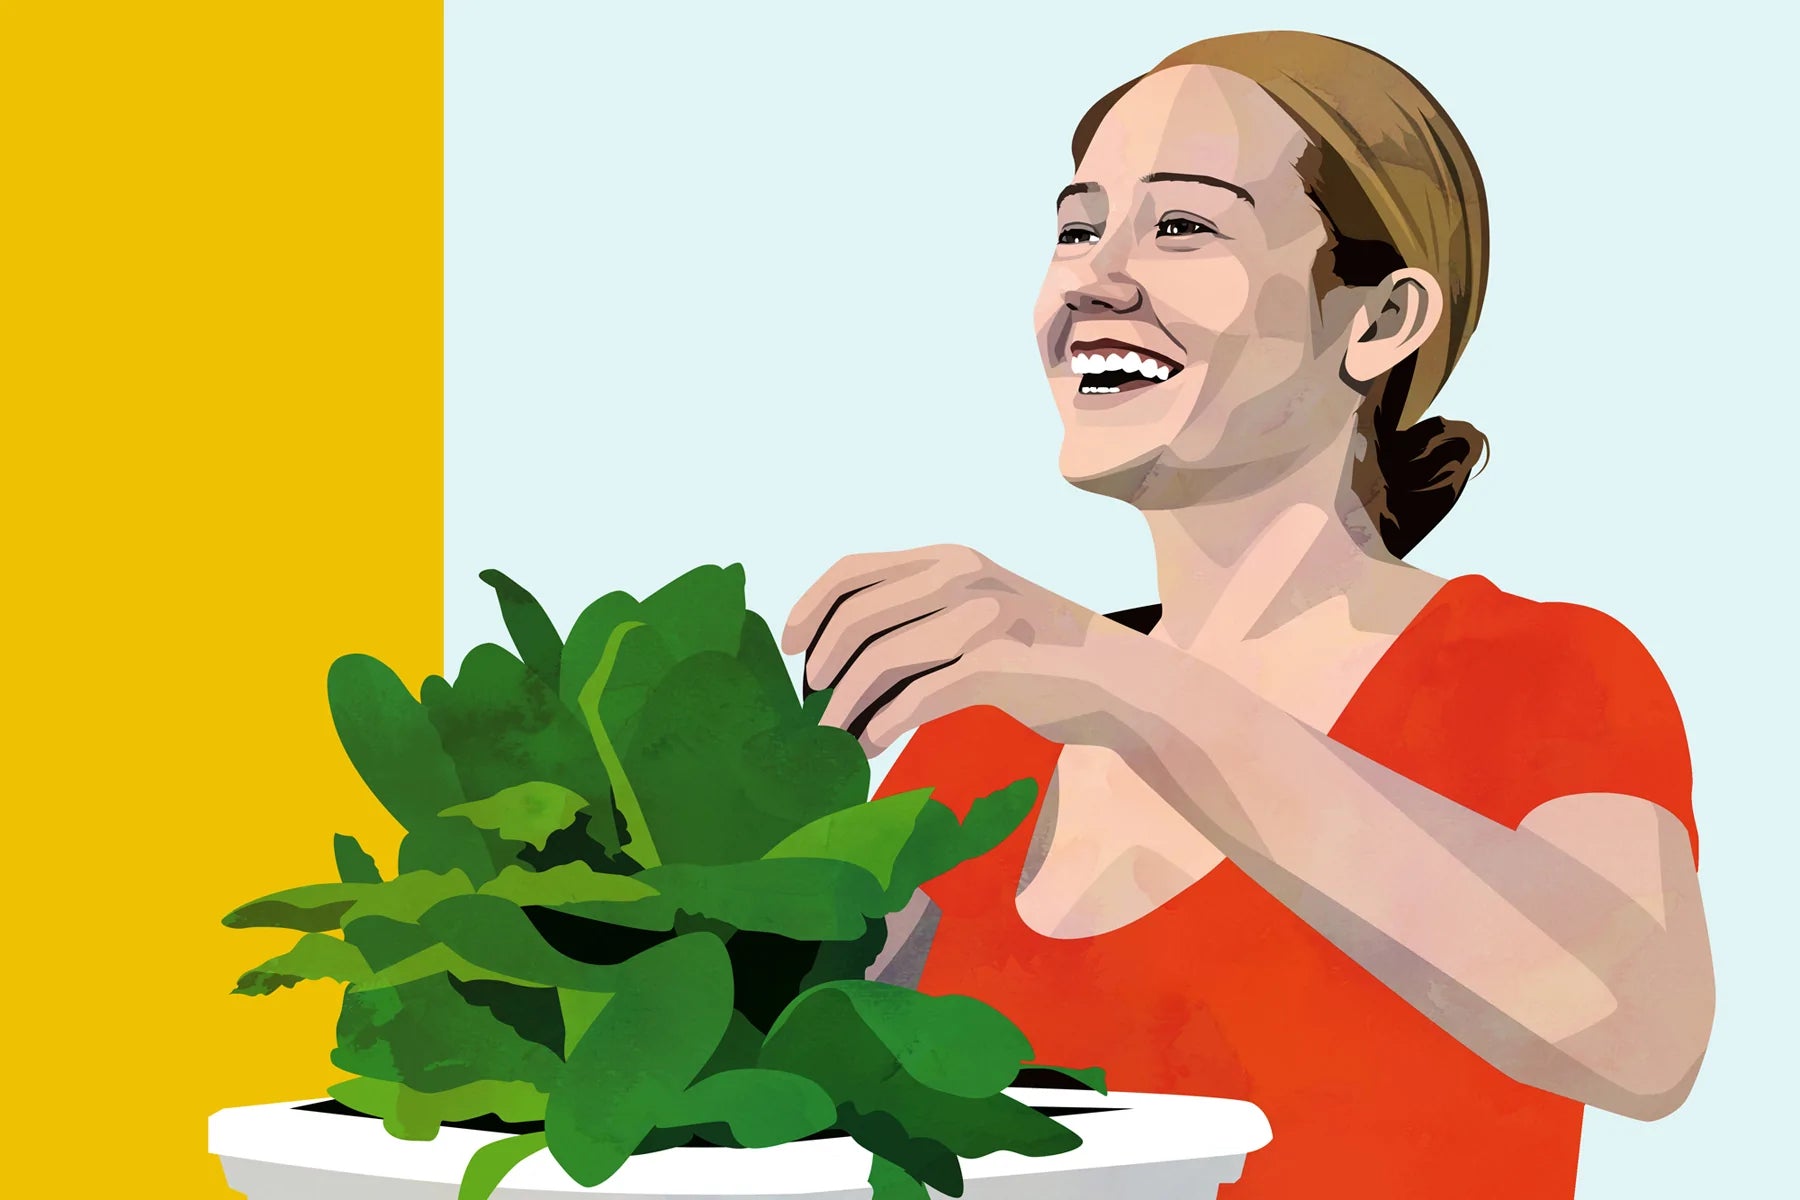 Illustration of a woman tending to a planter growing lettuce